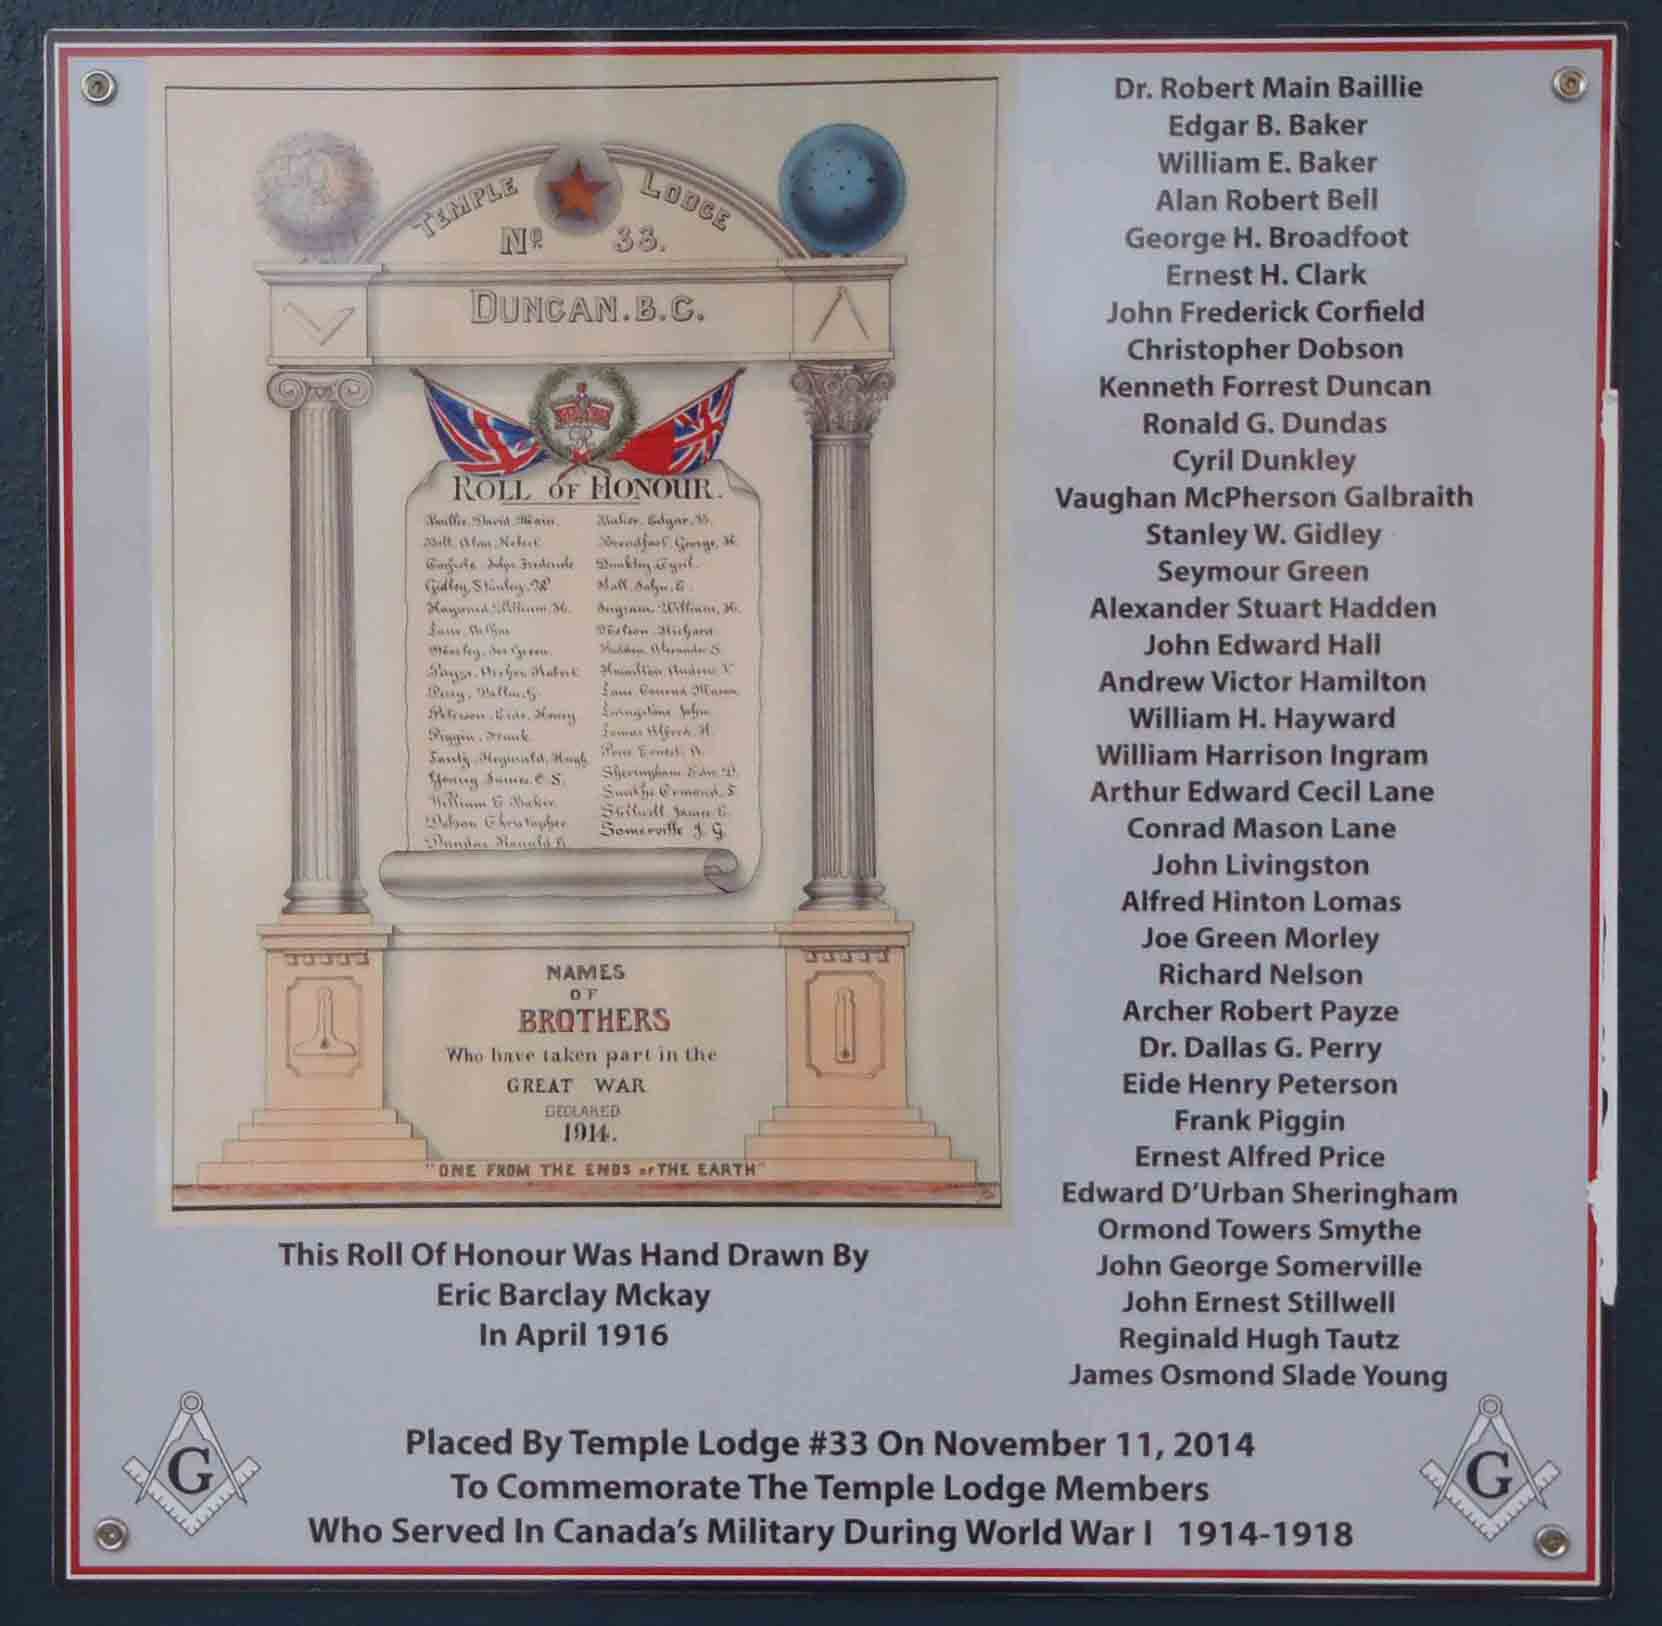 Plaque at the entrance of Duncan Masonic Temple commemorating the Temple Lodge First World War Veterans